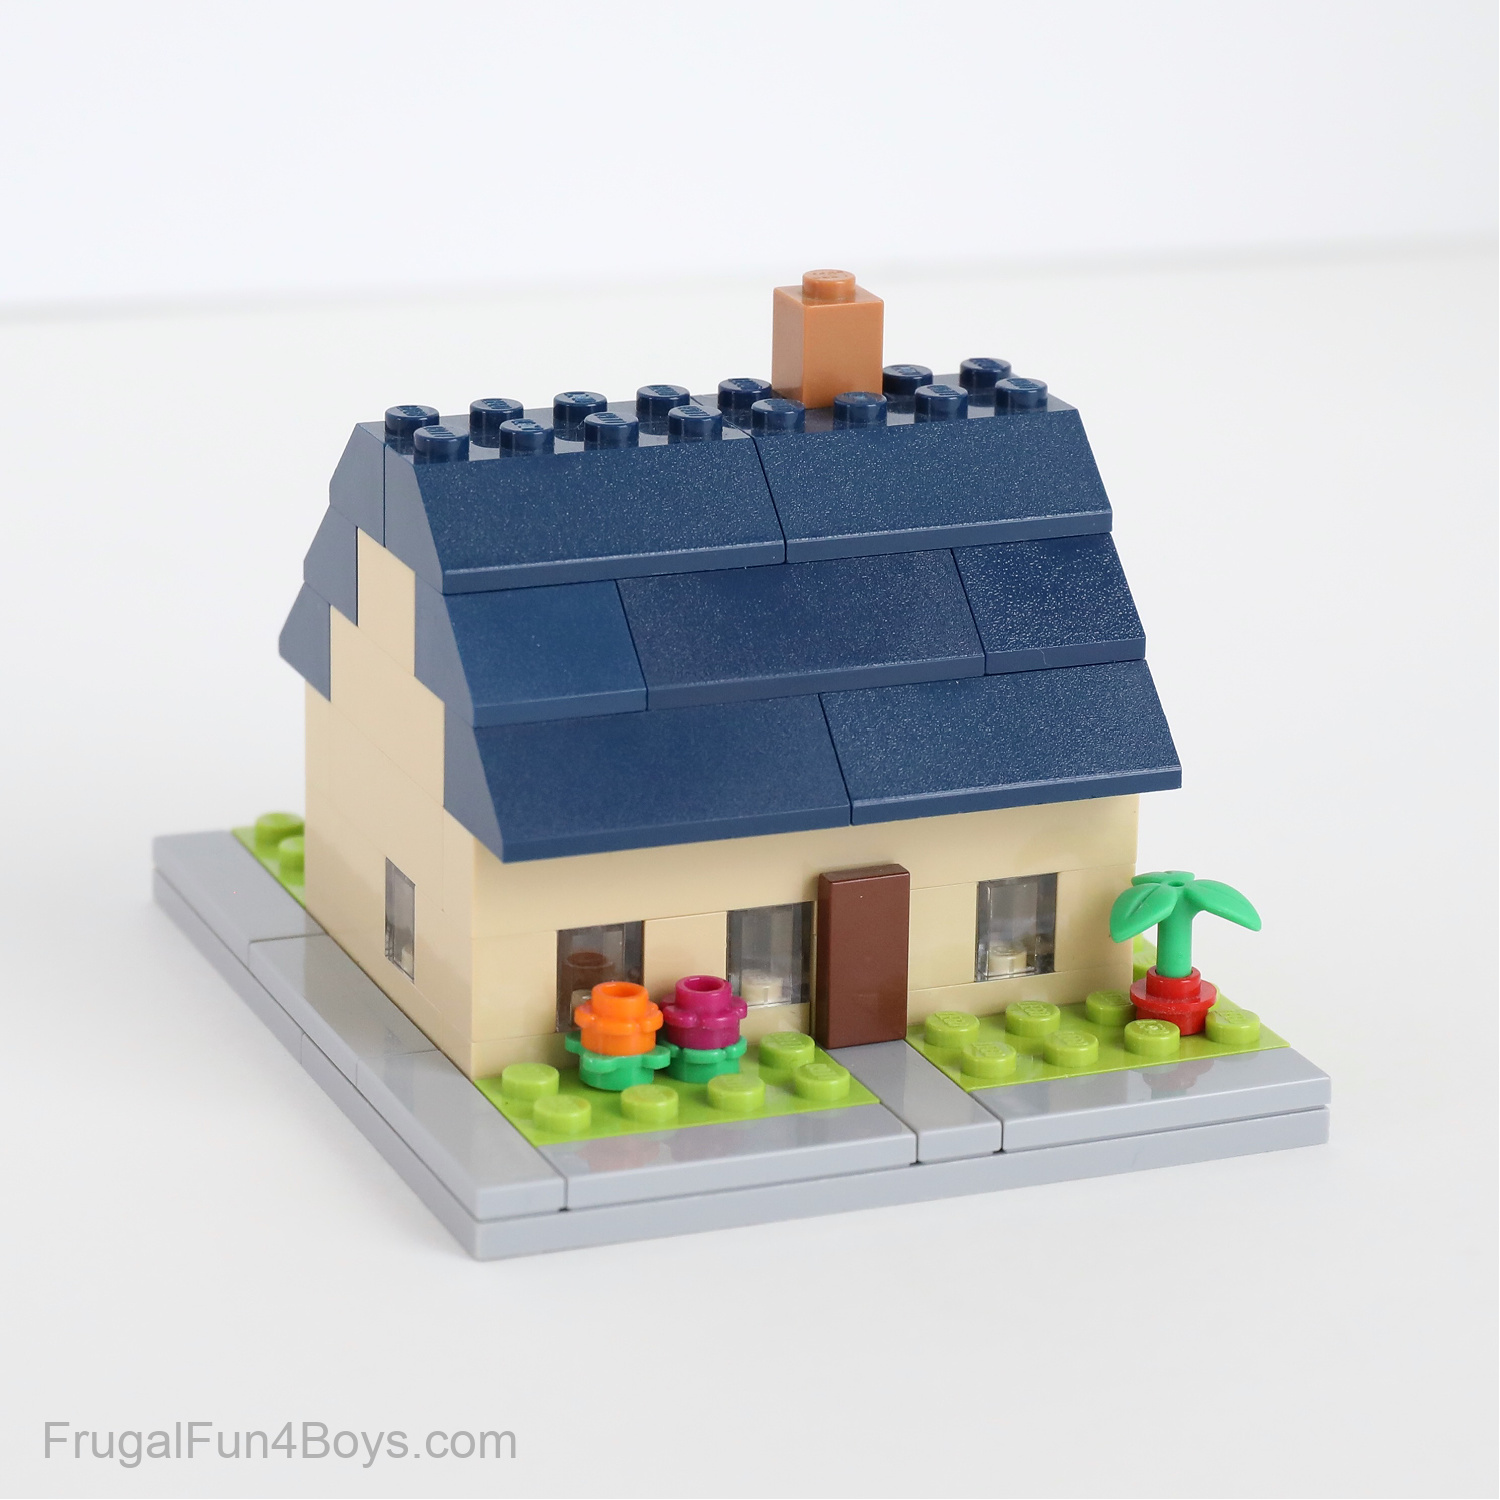 Champagne Tolk gift Build a LEGO Tiny Neighborhood - Frugal Fun For Boys and Girls